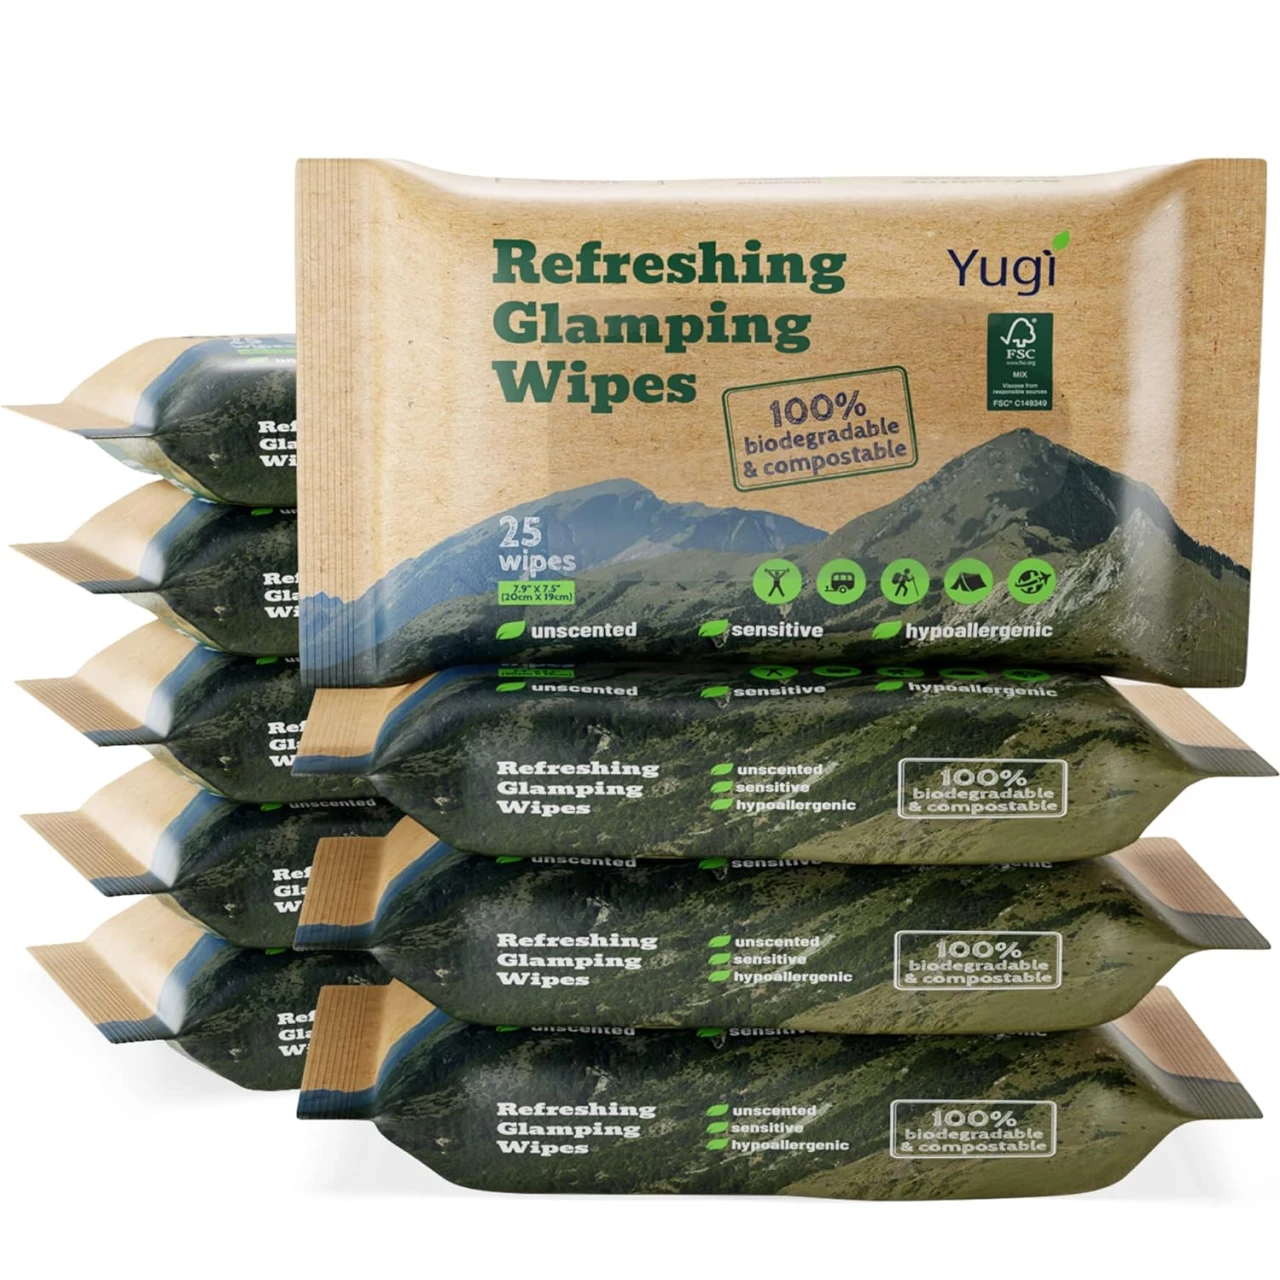 Yugi wet wipes, Face and Body Wipes for Camping, Post Workout and Traveling, Plant-based fibers unscented wipes (9 packs, 225 wipes)